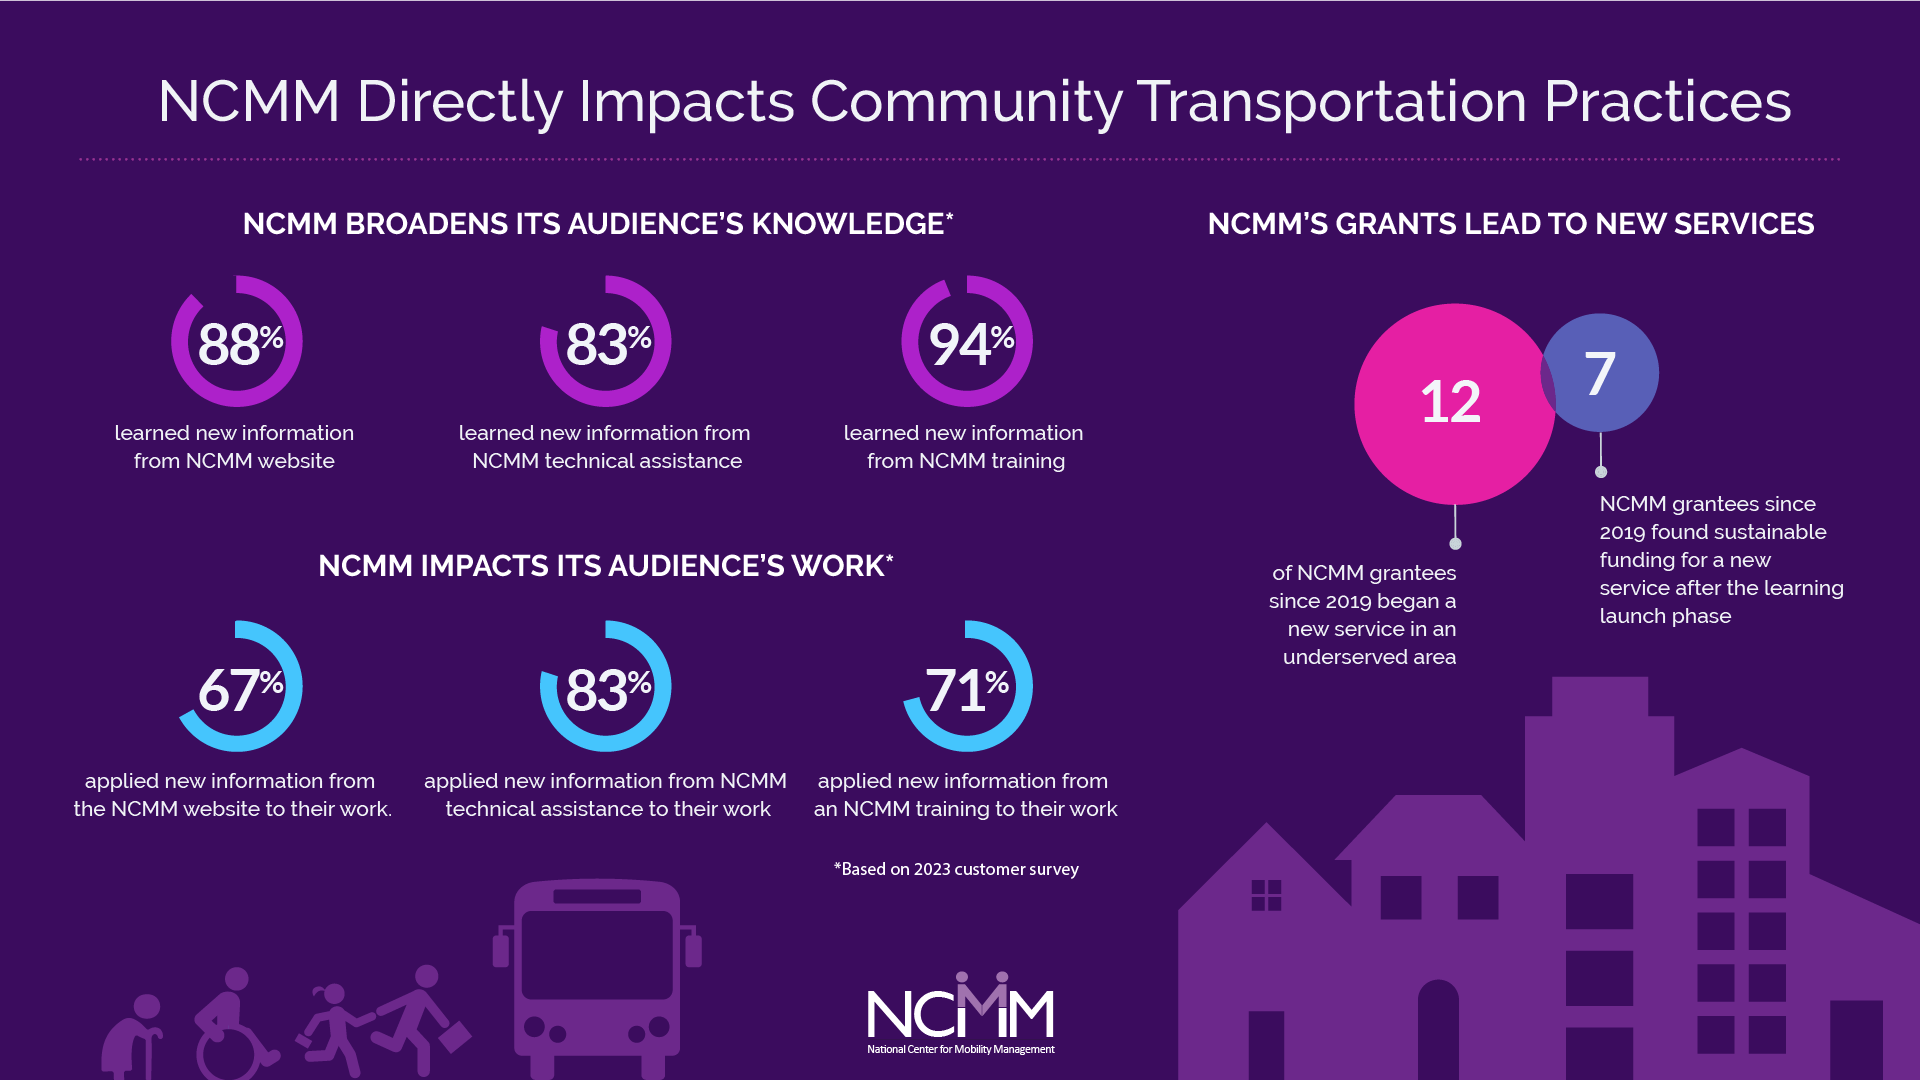 An infographic titled "NCMM directly impacts community transportation practices" with a section titled "NCMM broadens its audience's knowledge" showing that 88% learned new information from the website, 83% from NCMM technical assistance, and 94% from NCMM technical training. A section titled "NCMM impacts its audience's work" shows that 67% applied new information from the NCMM website to their work, 83% applied new information from NCMM technical assistance to their work, and 71% applied new information from an NCMM training to their work. Another part of the infographic shows that 12 NCMM grantees since 2019 began a new service in an underserved area, and 7 found sustainable funding after their learning launch phase.